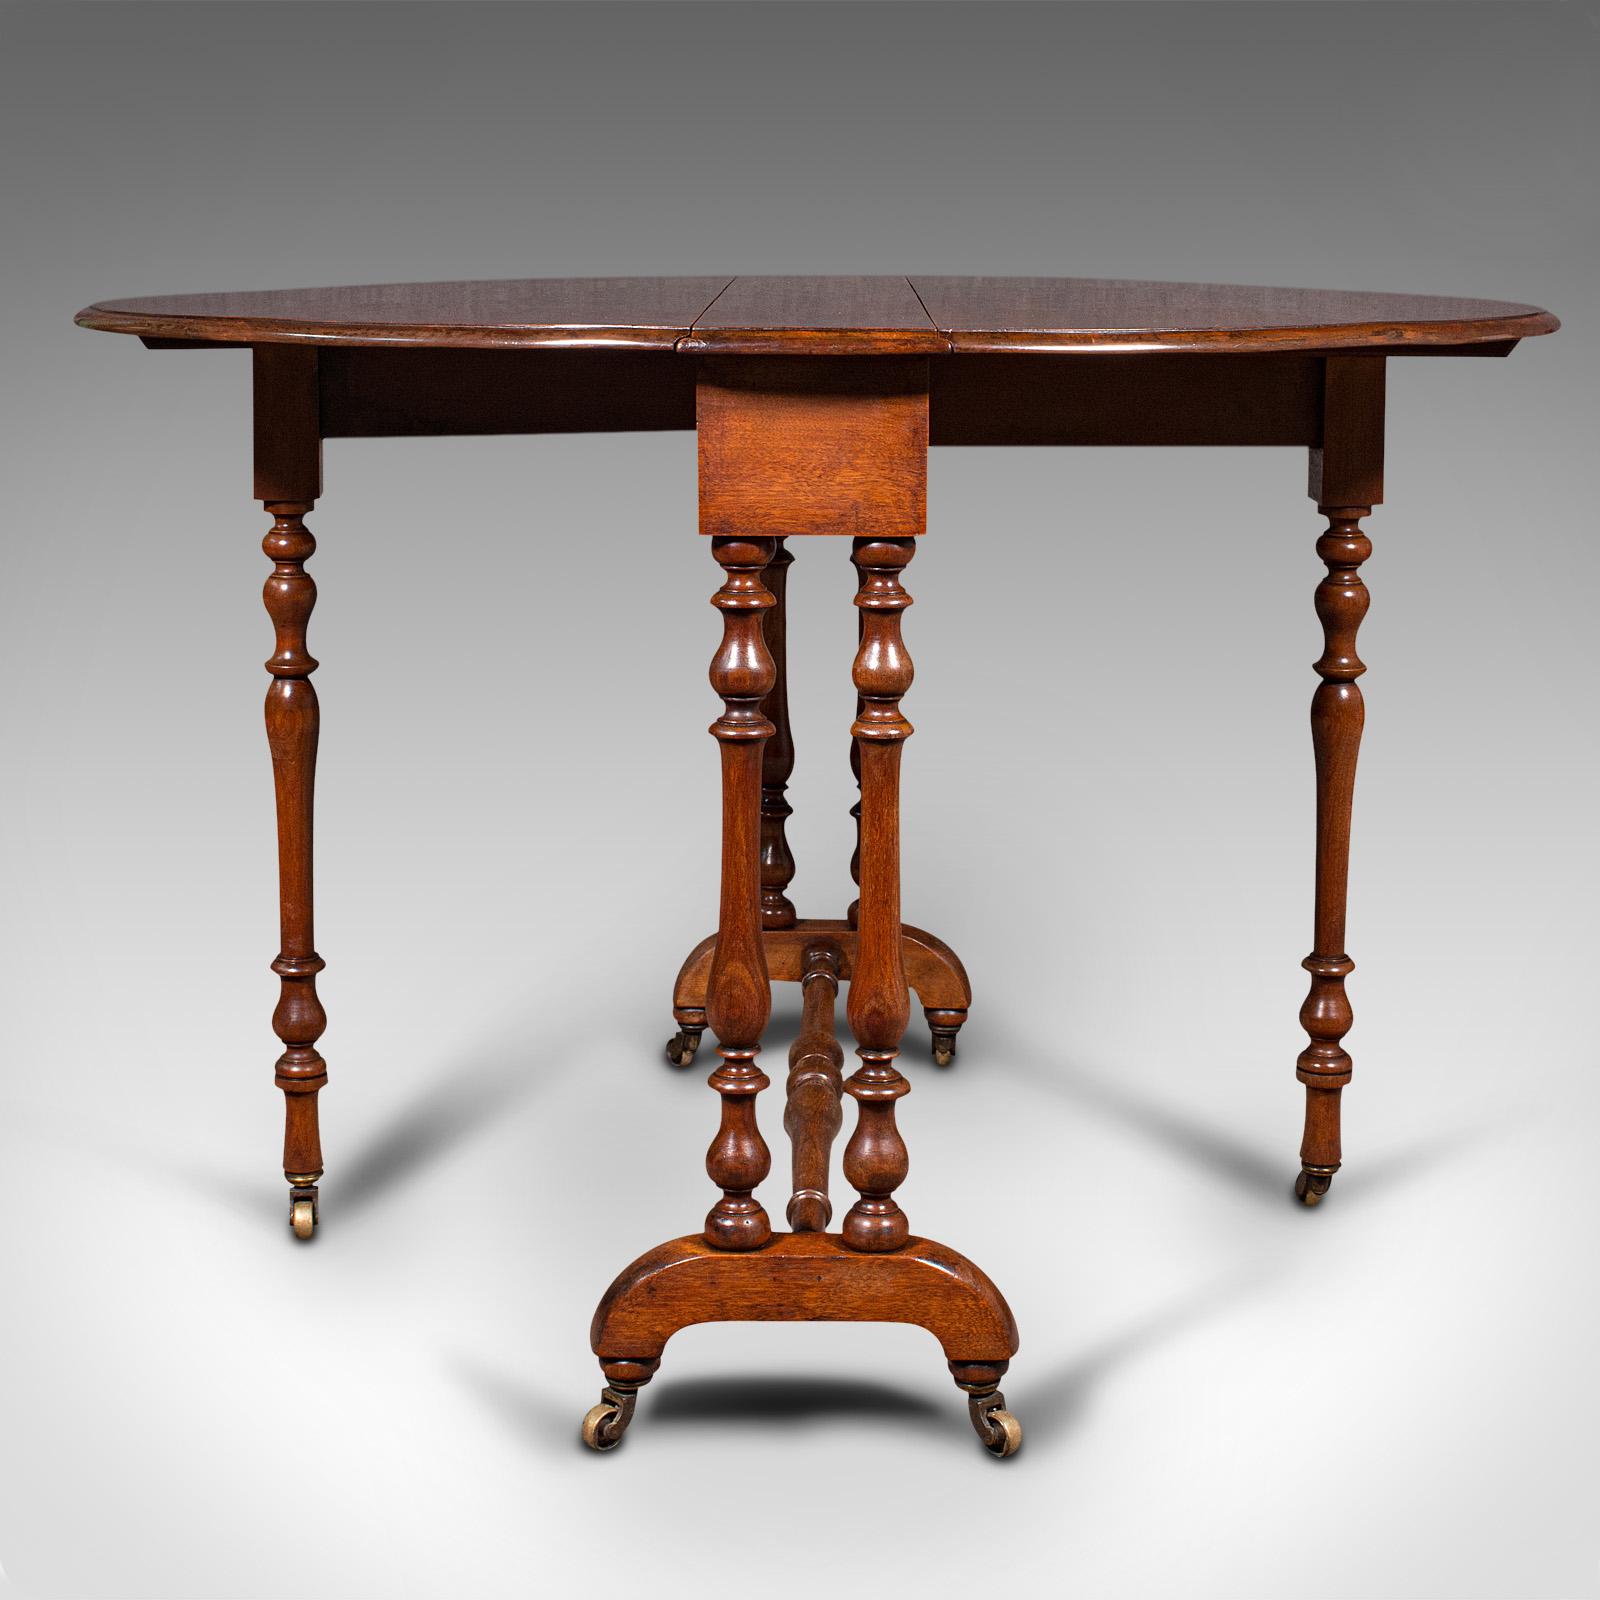 Wood Antique Oval Sutherland Table, English, Gate Leg, Occasional, Victorian, C.1850 For Sale